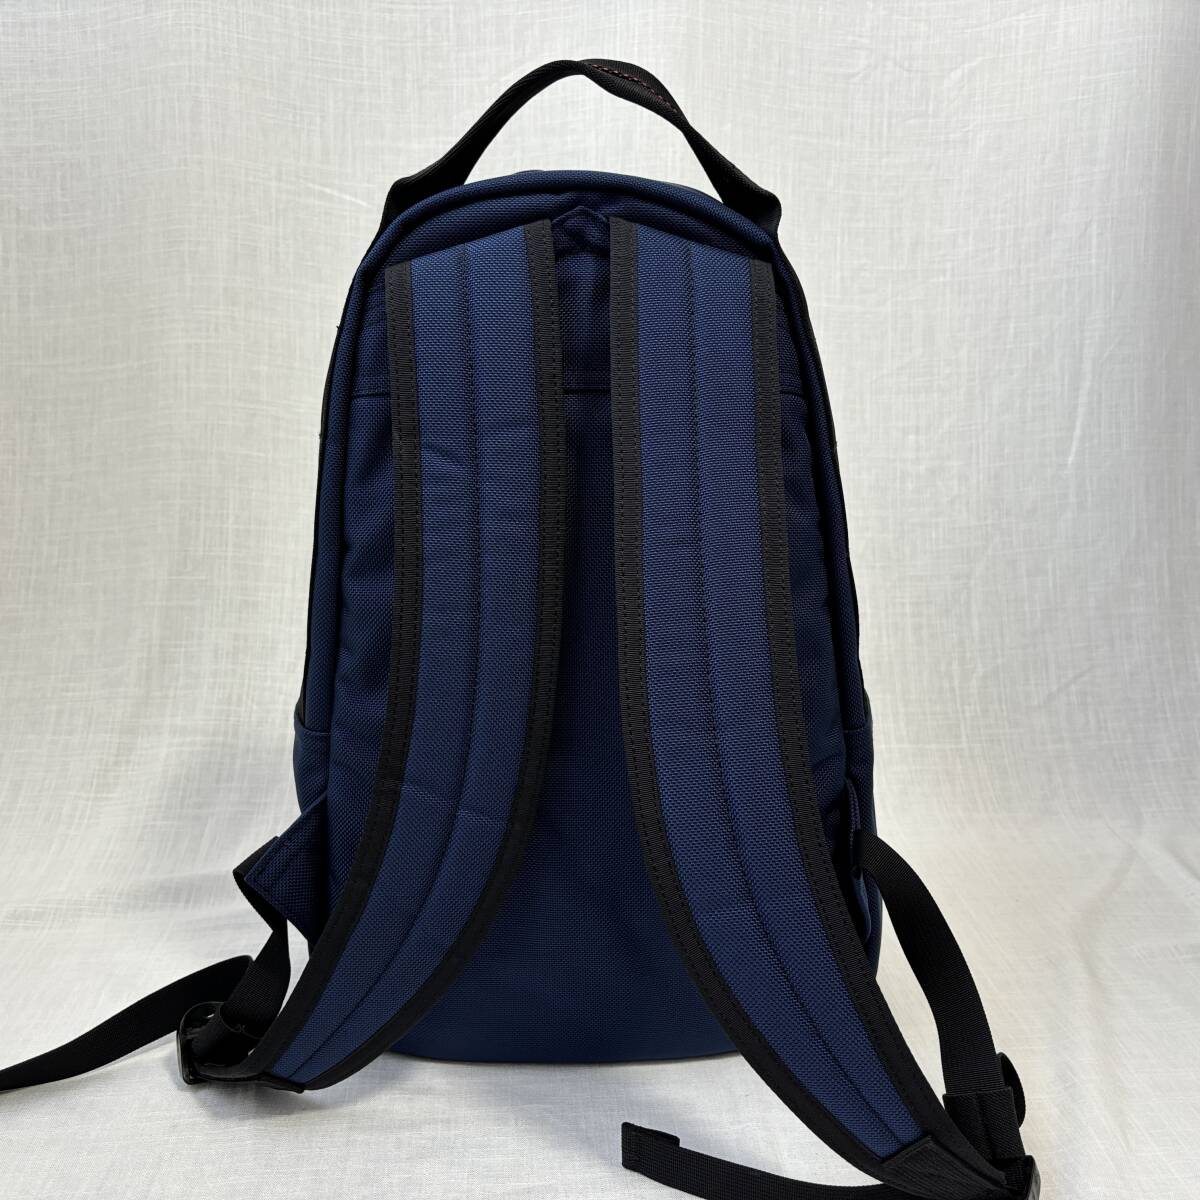 #1 jpy ~ < ultimate beautiful goods!!>#BRIEFING Briefing rope sak backpack rucksack stylish burr stick A4/PC navy BRF342219